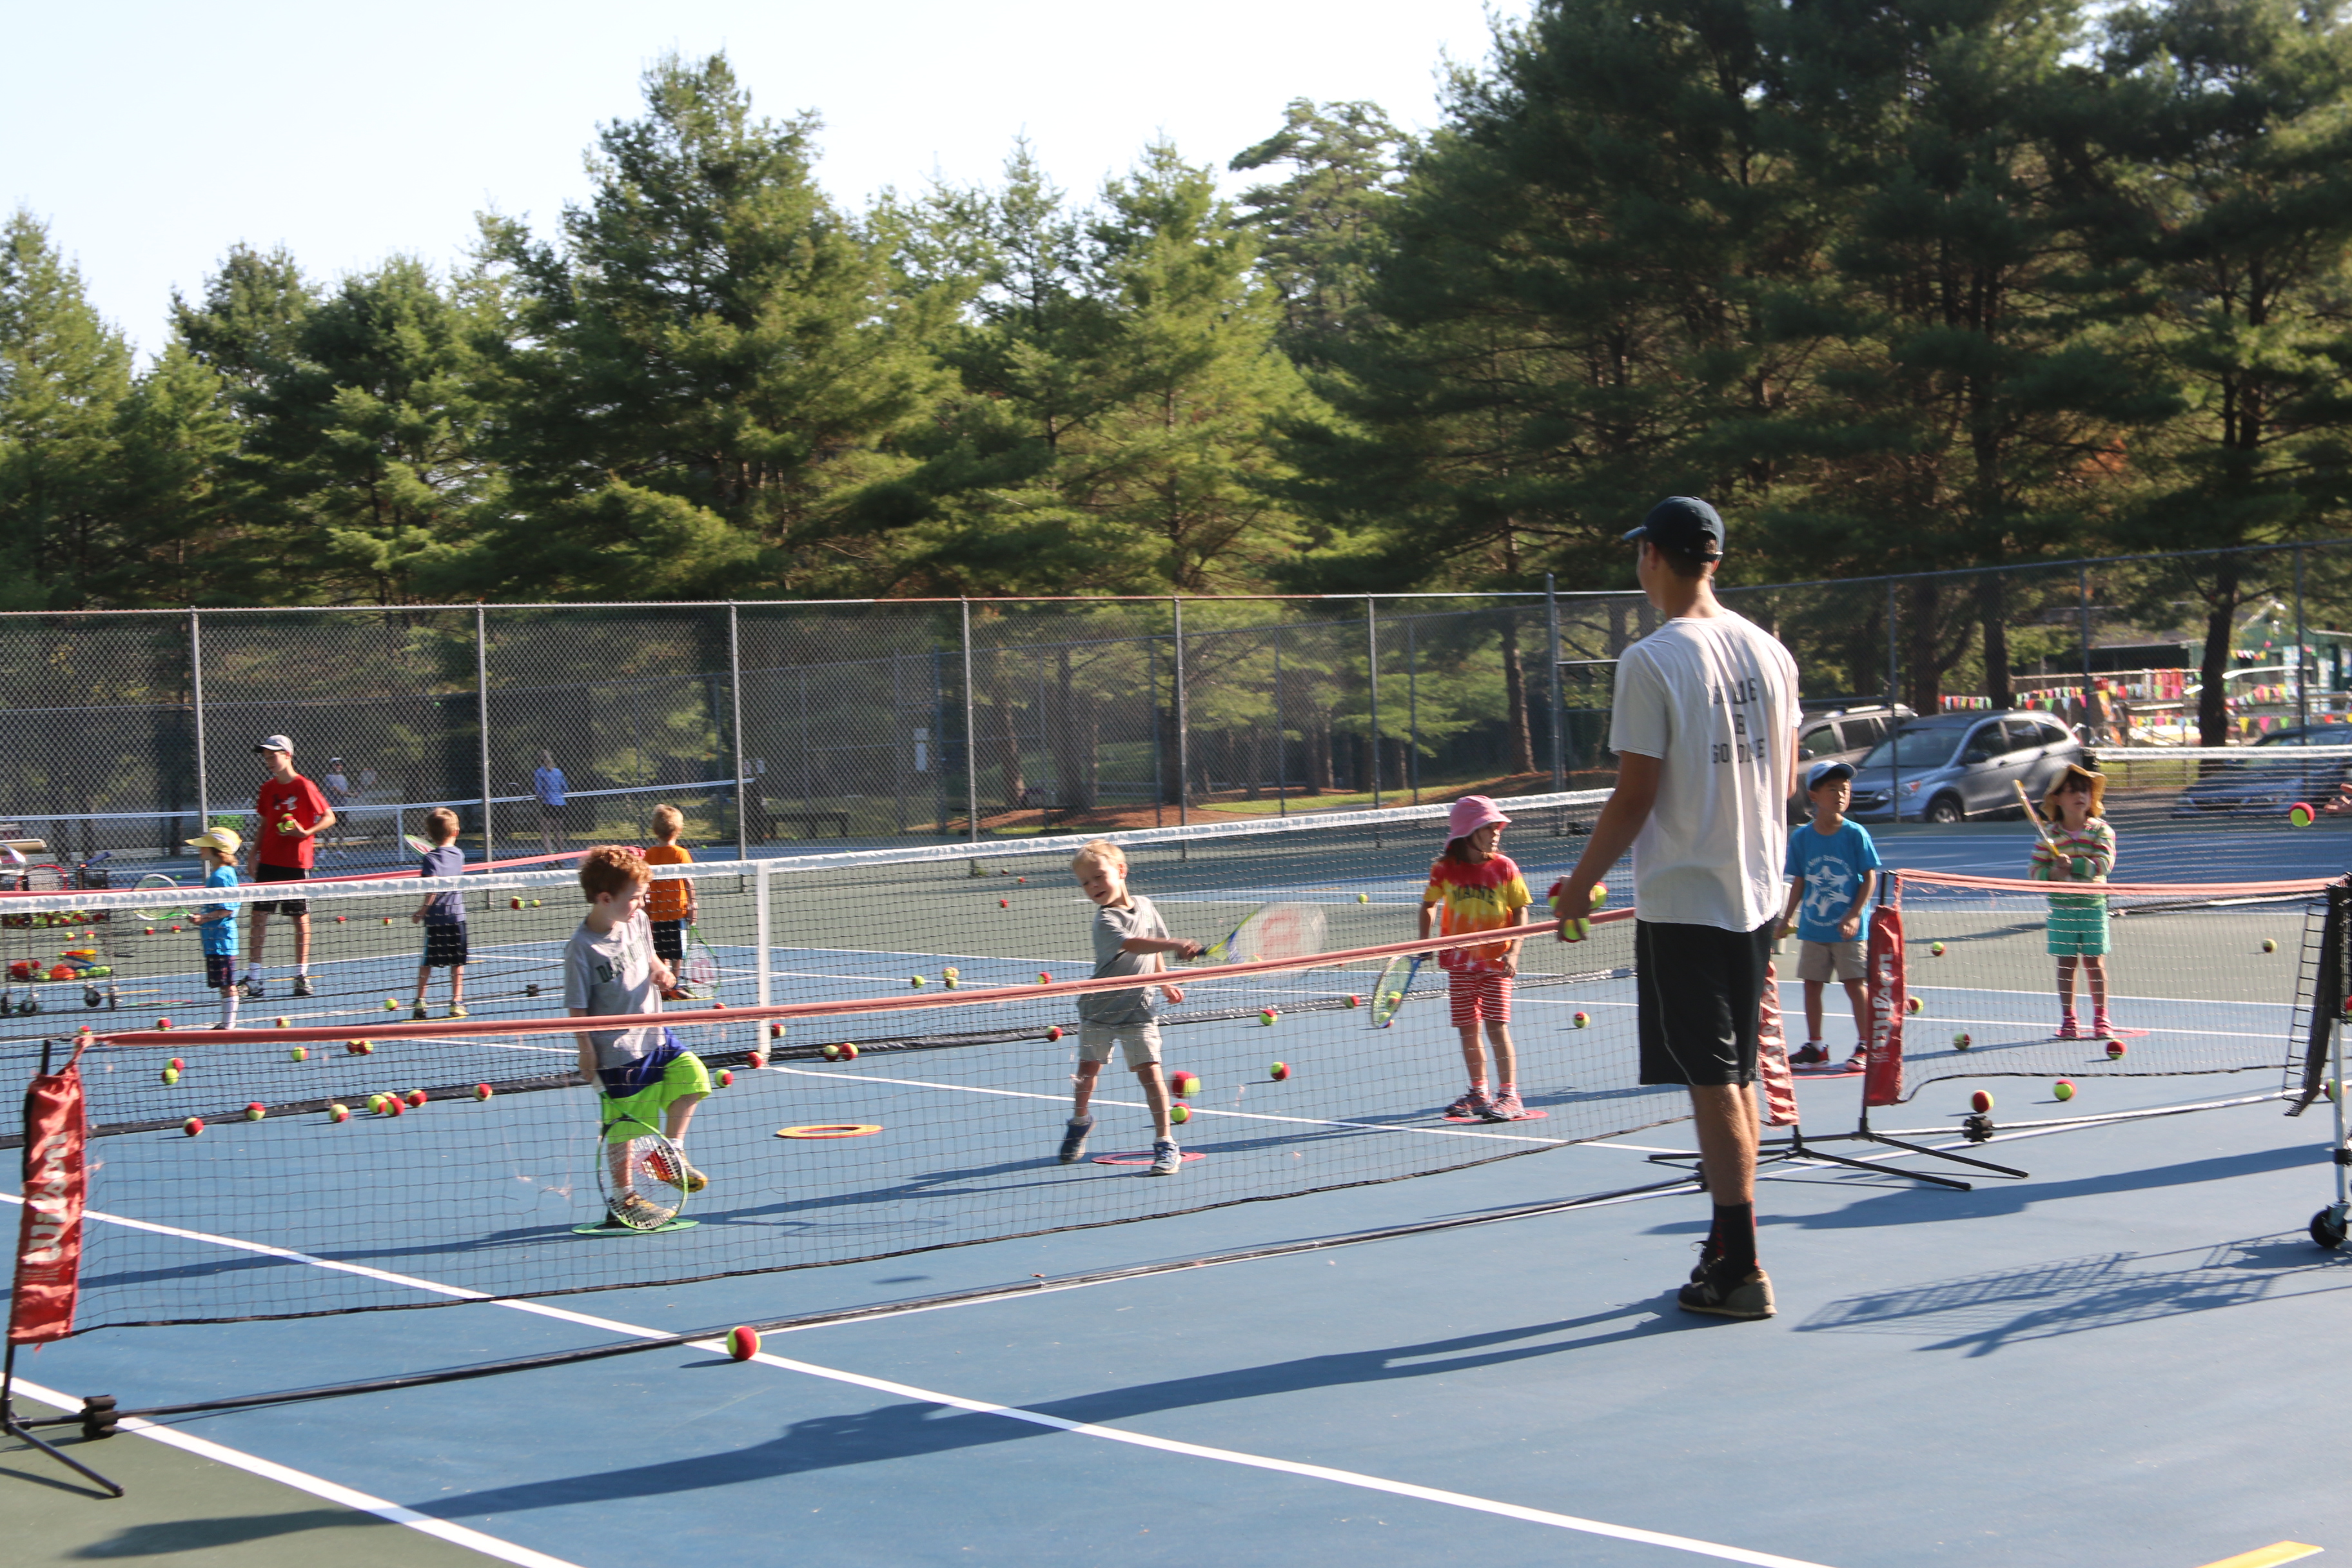 kids on tennis court for camp